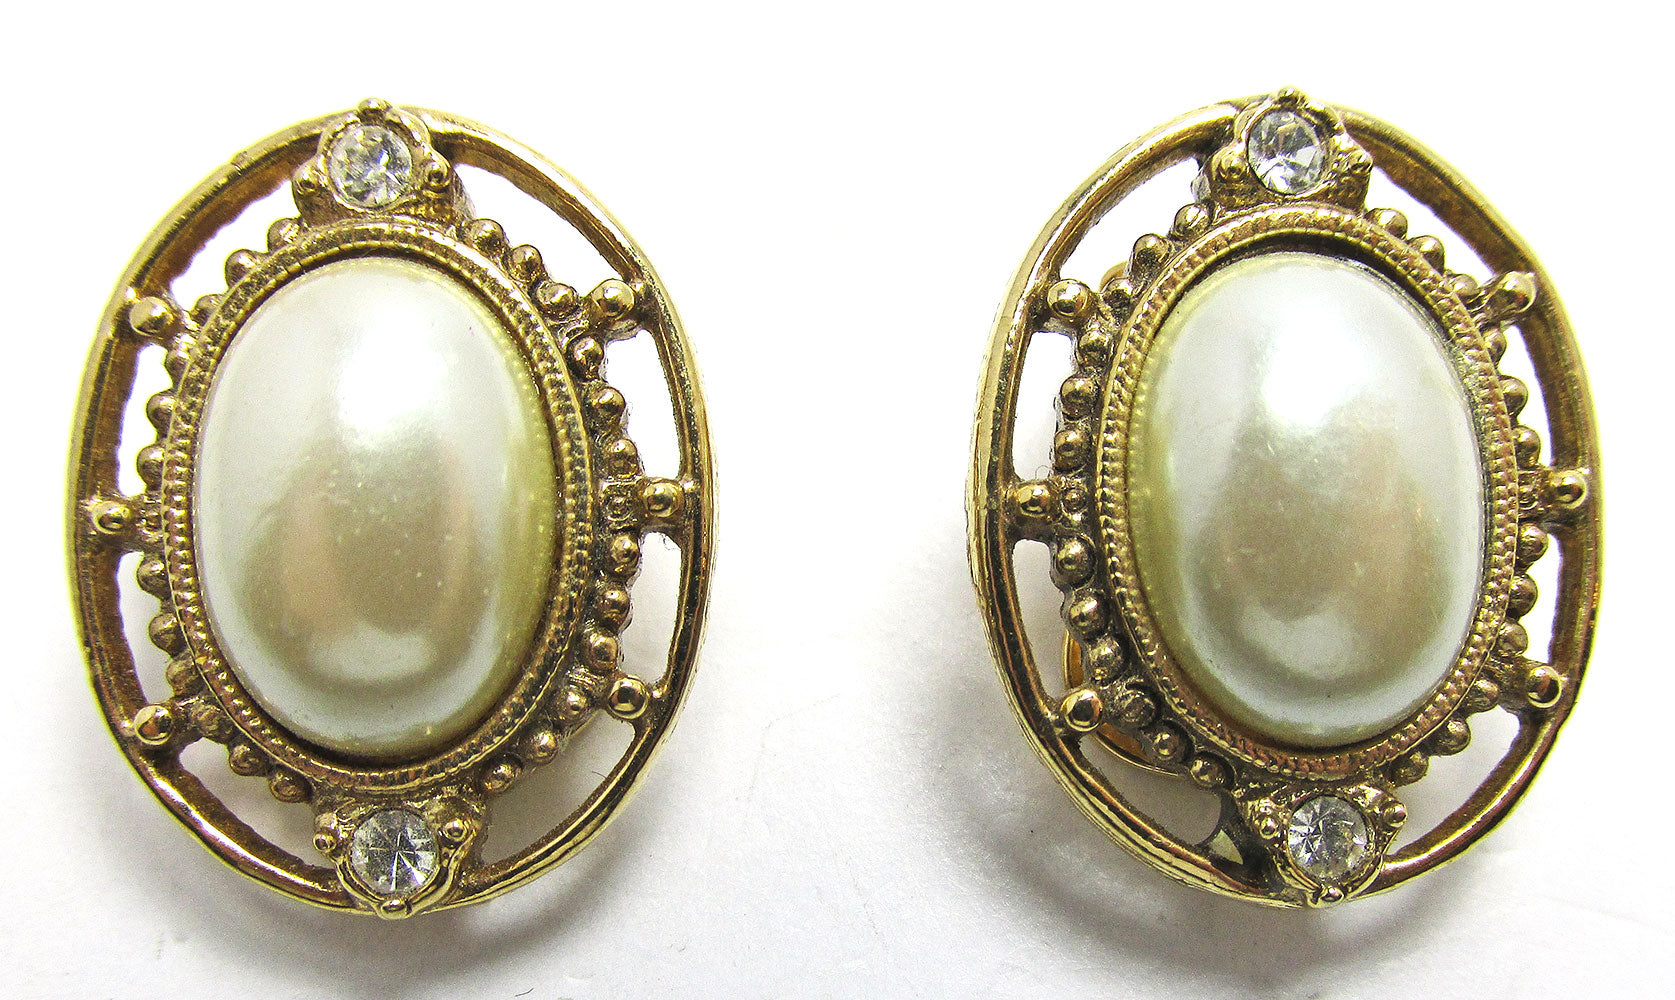 1970s Desirable Vintage Retro Diamante and Pearl Button Earrings - Front